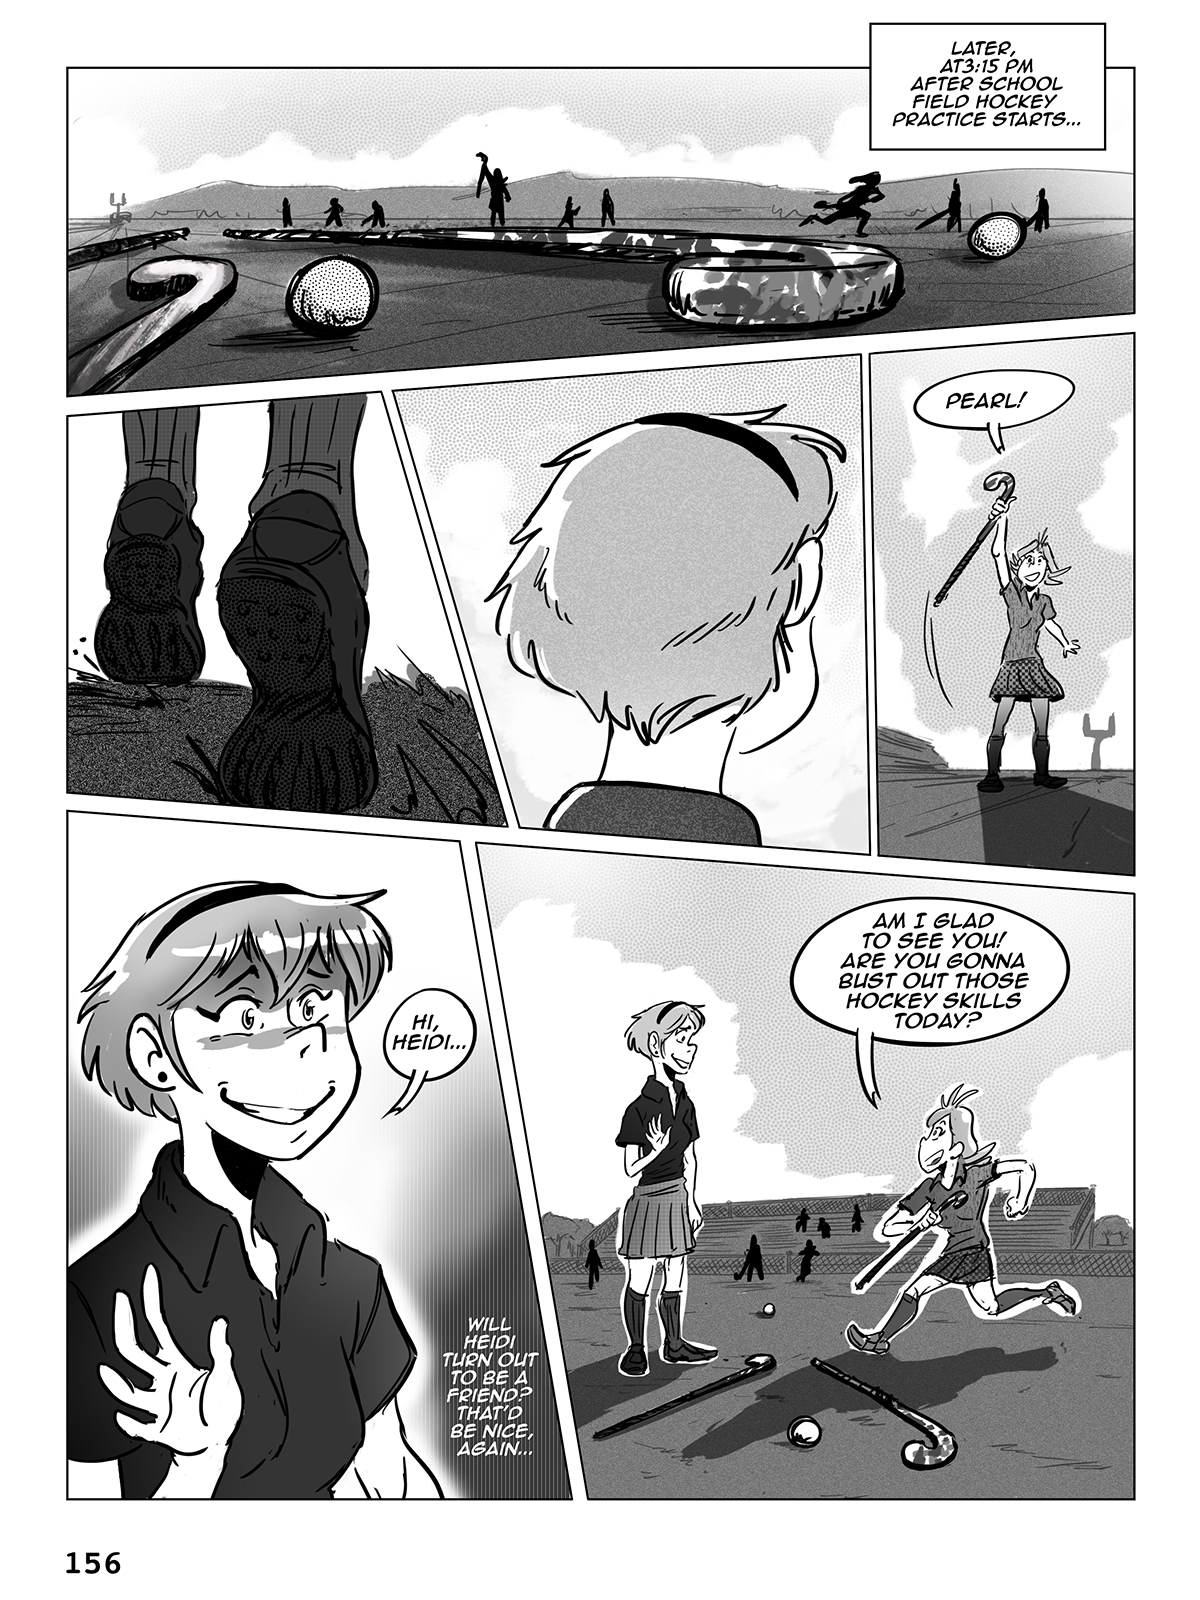 Hockey, Love, & GUTS! – Chapter 7 – Page 156